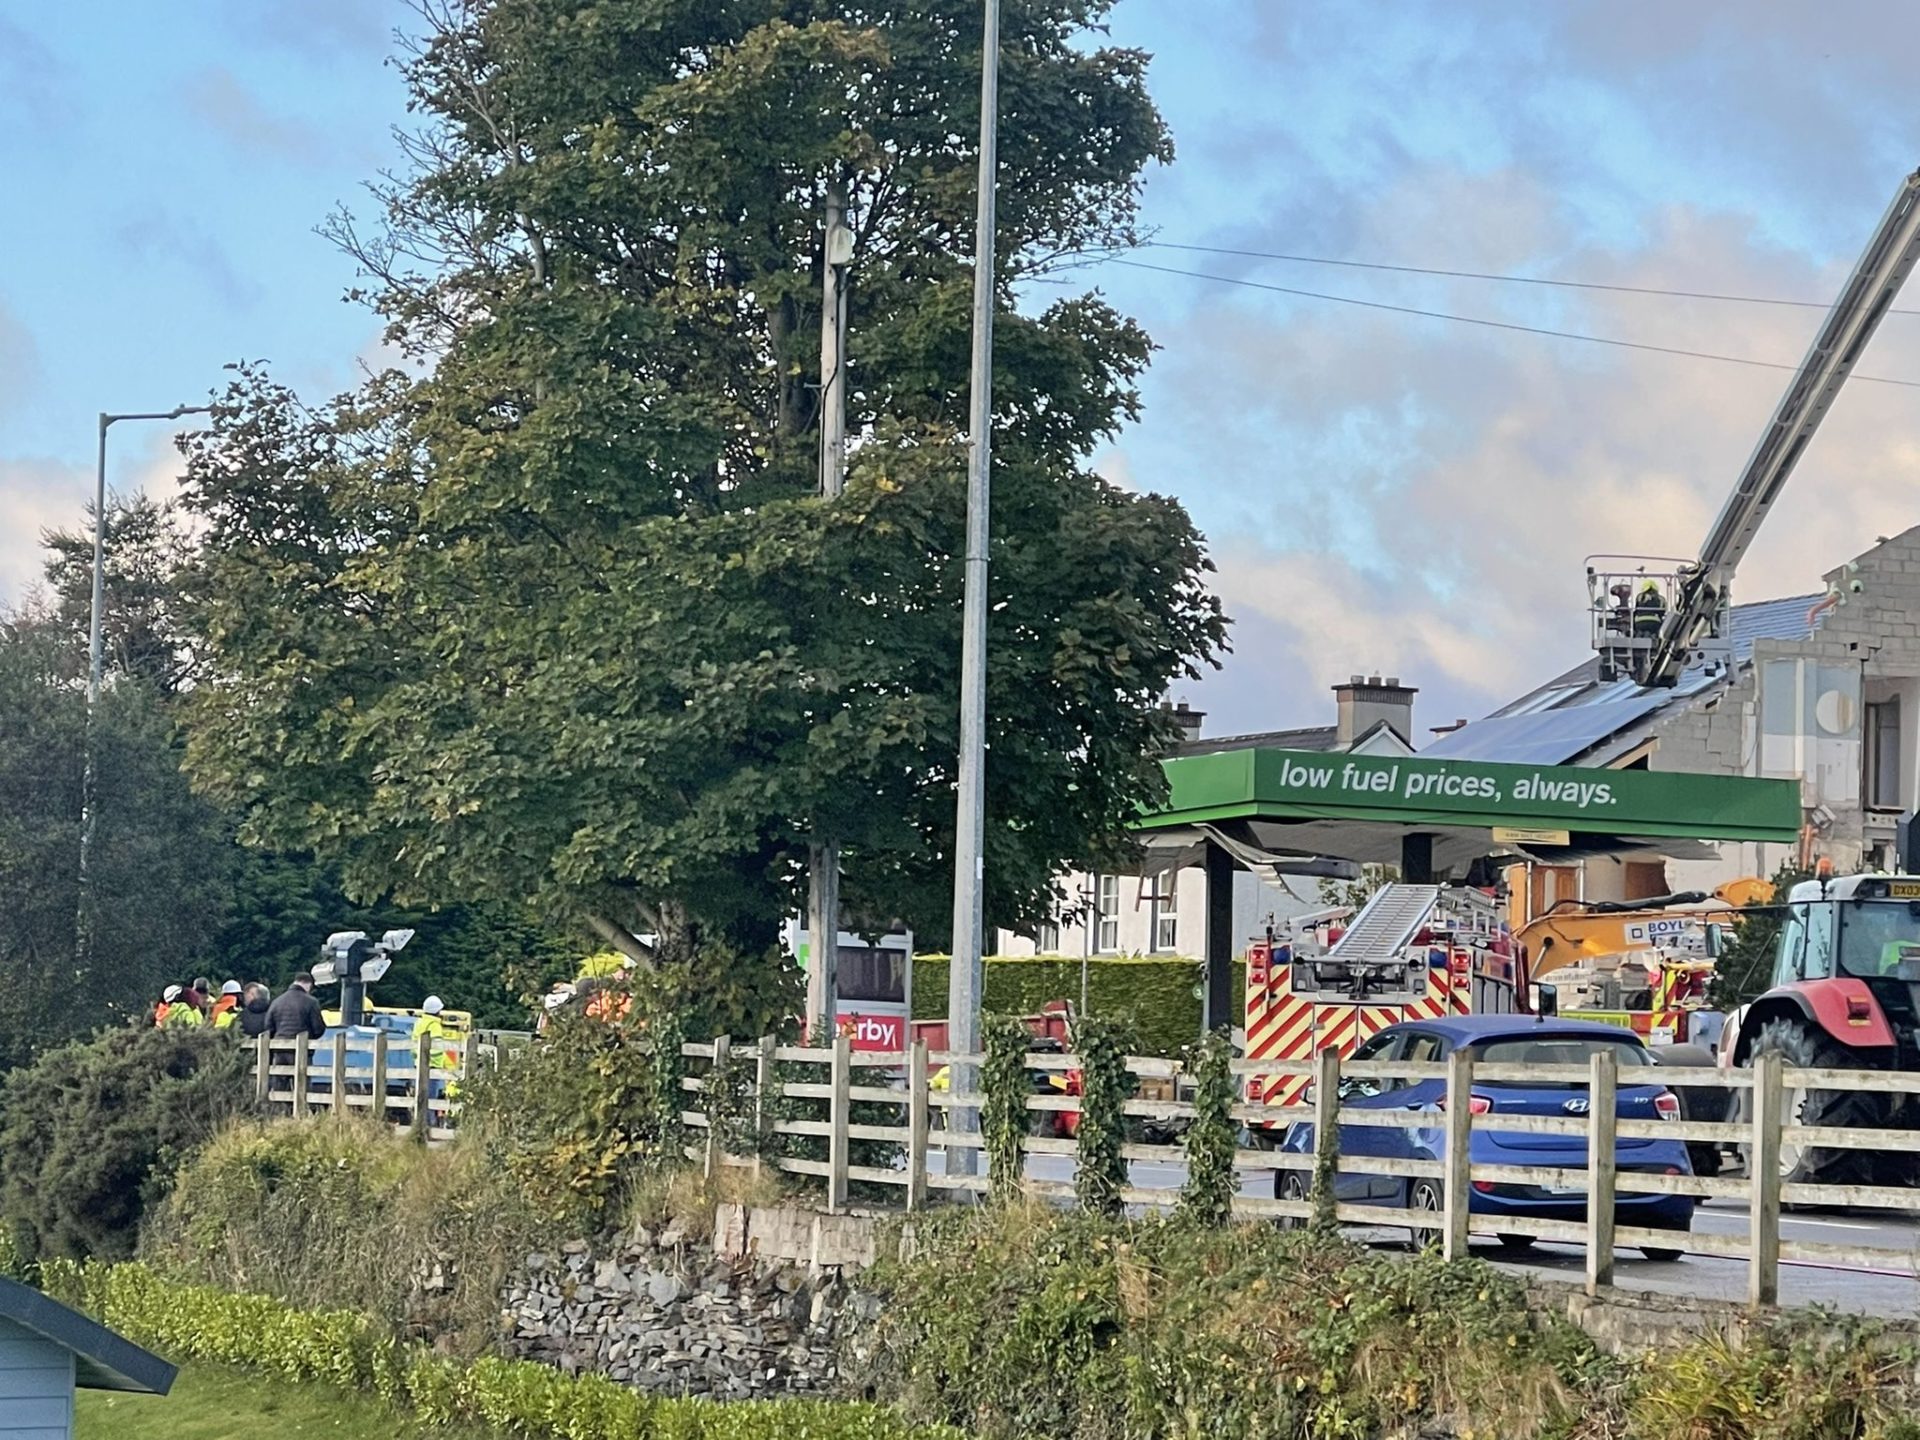 The scene of the explosion at the Applegreen petrol station in Creeslough, Co Donegal